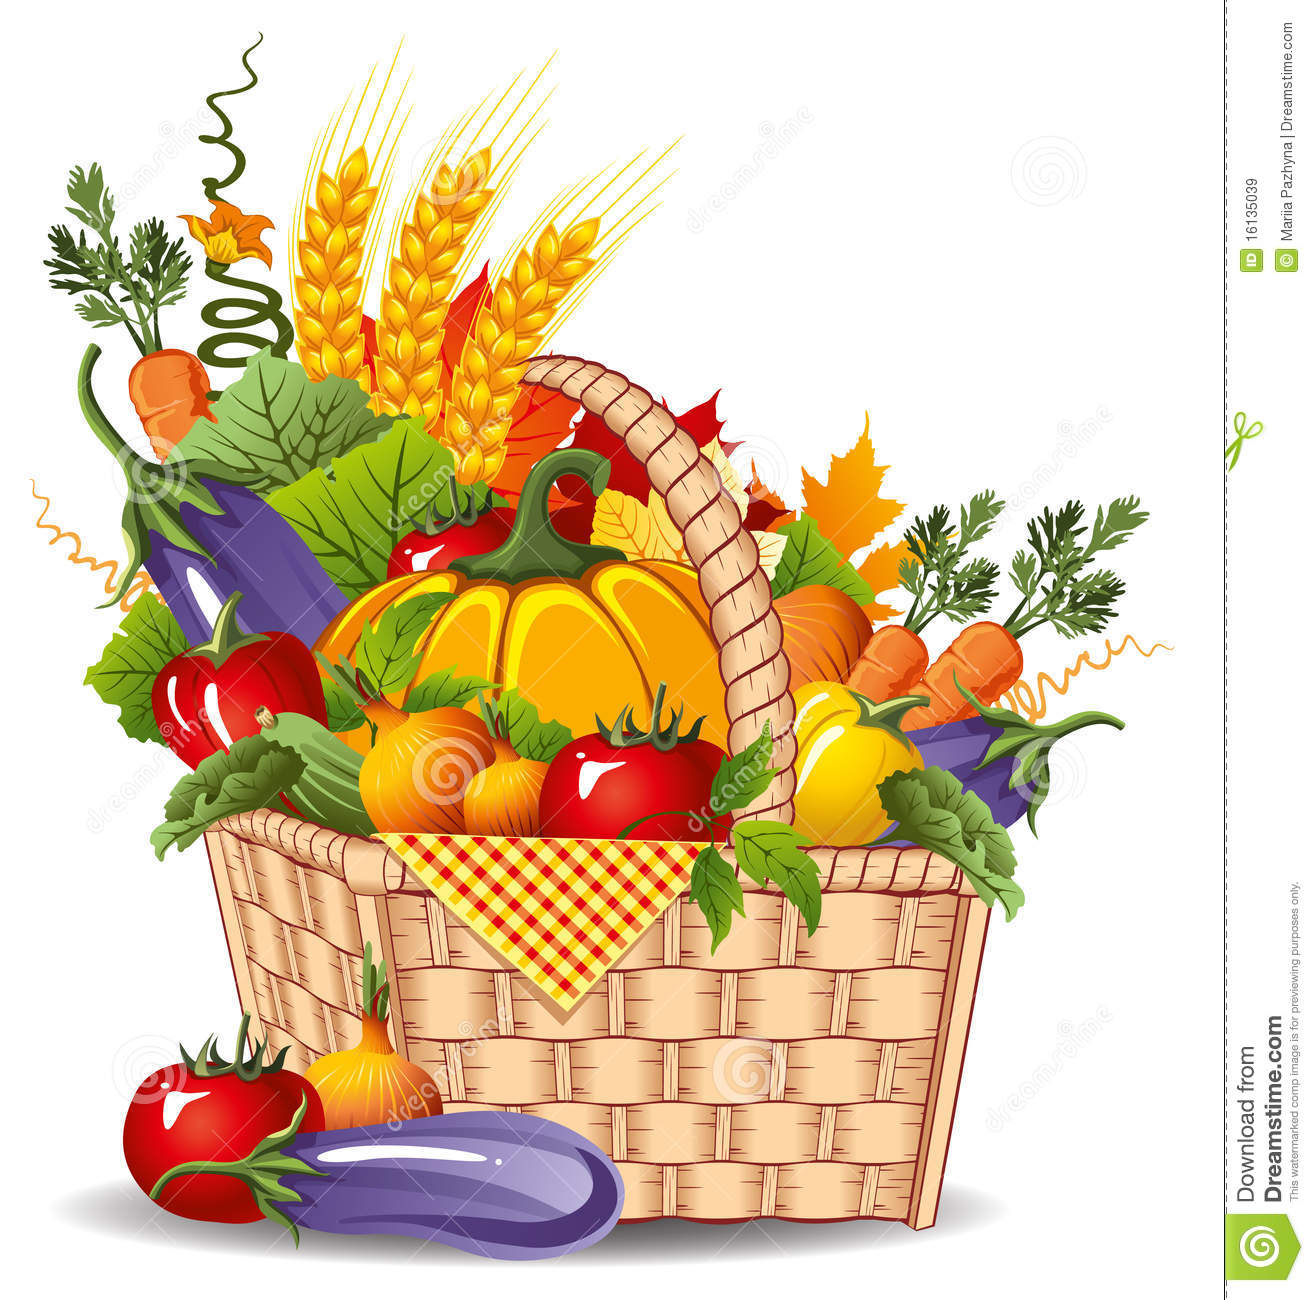 Rich Harvest Royalty Free Stock Images   Image  16135039